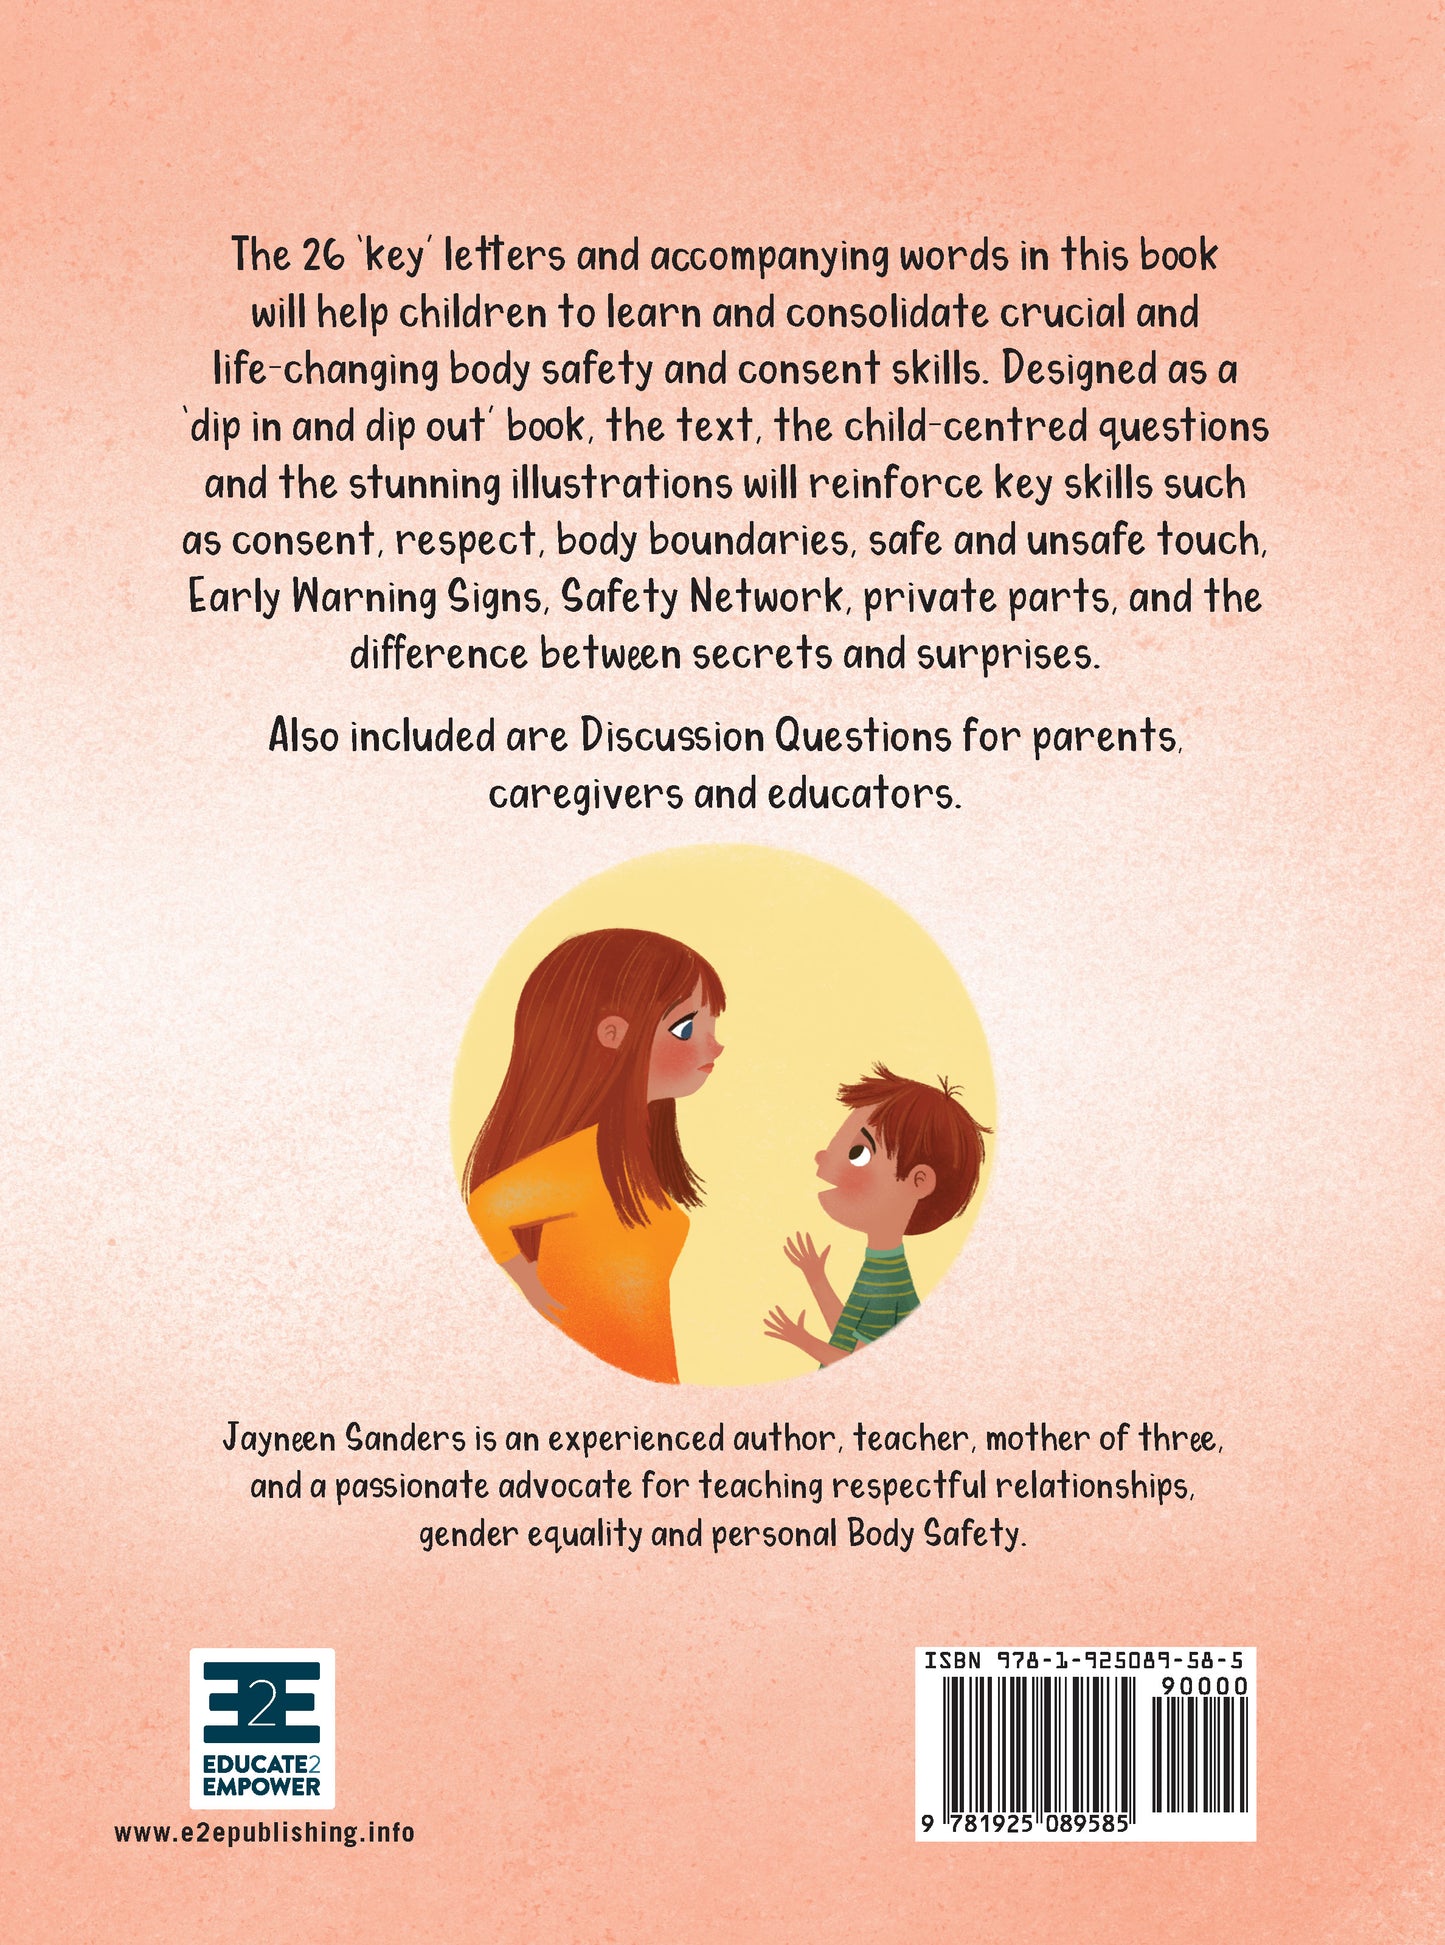 The back cover of the book ‘ABC of Body Safety and Consent’ by Jayneen Sanders.